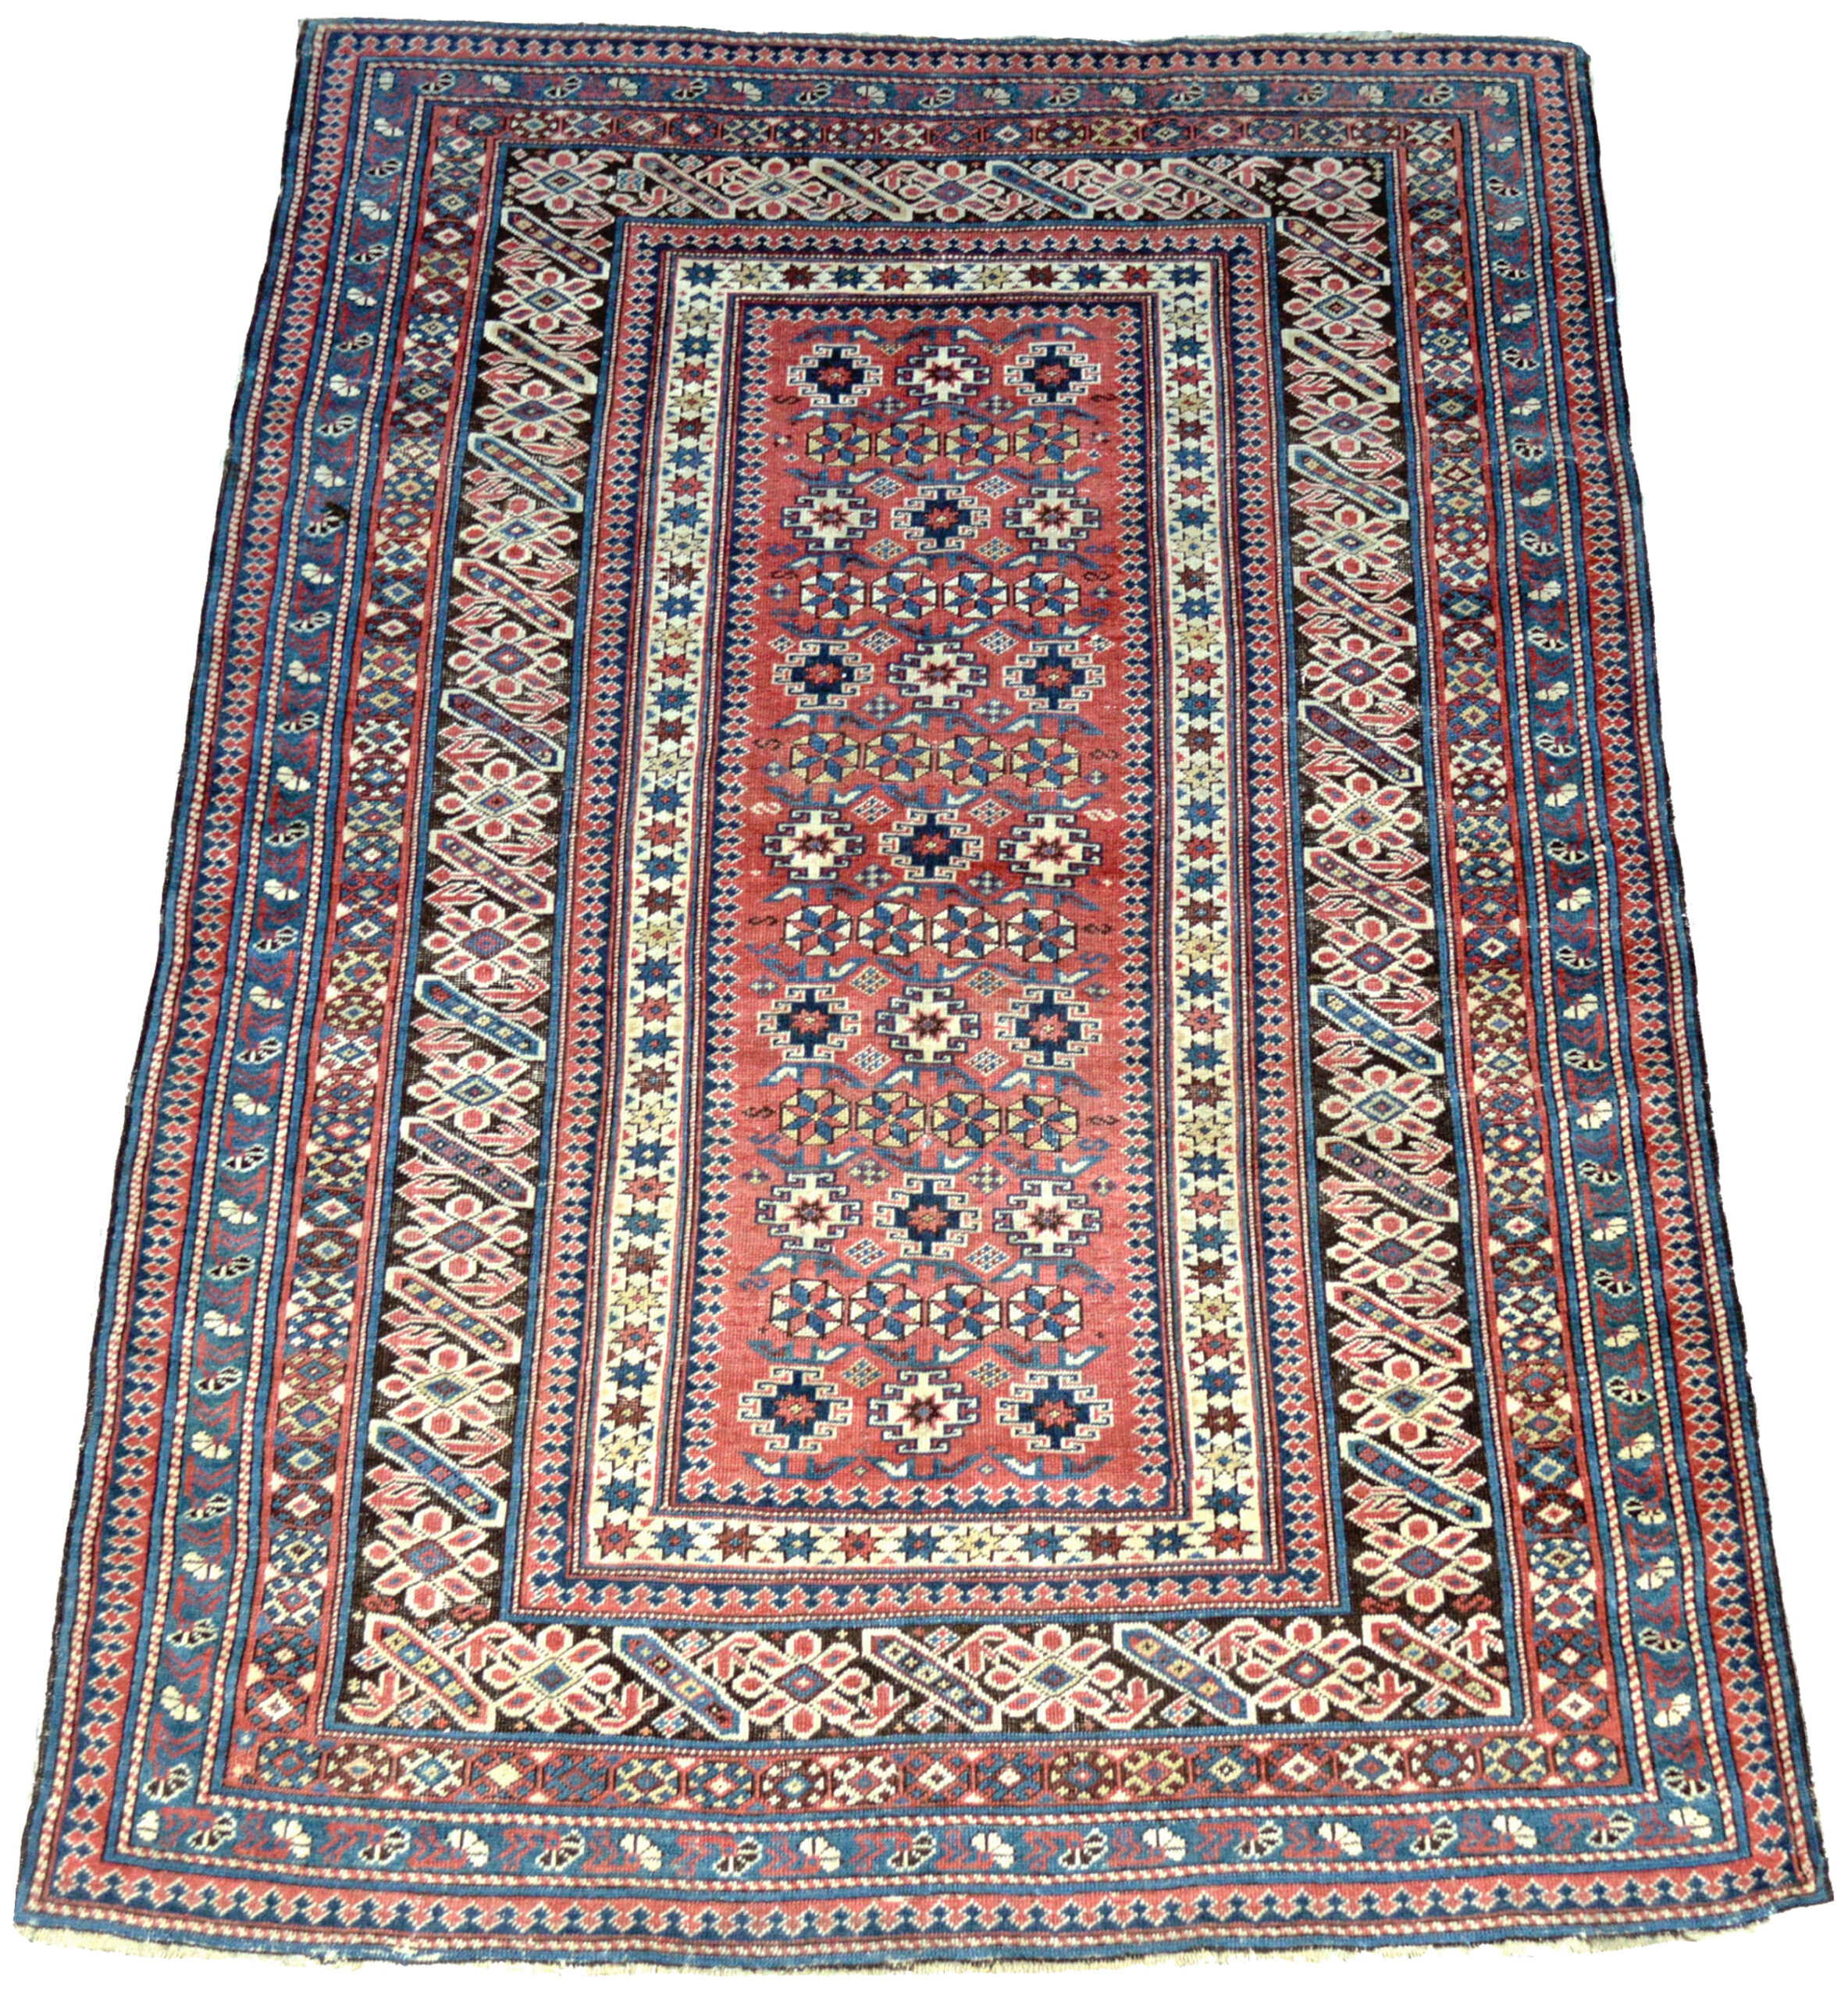 Douglas Stock Gallery, antique Oriental rugs Boston,MA area, antique rugs New England, antique Caucasian Chi Chi rug with a salmon field decorated with stylized flowers and geometric motifs